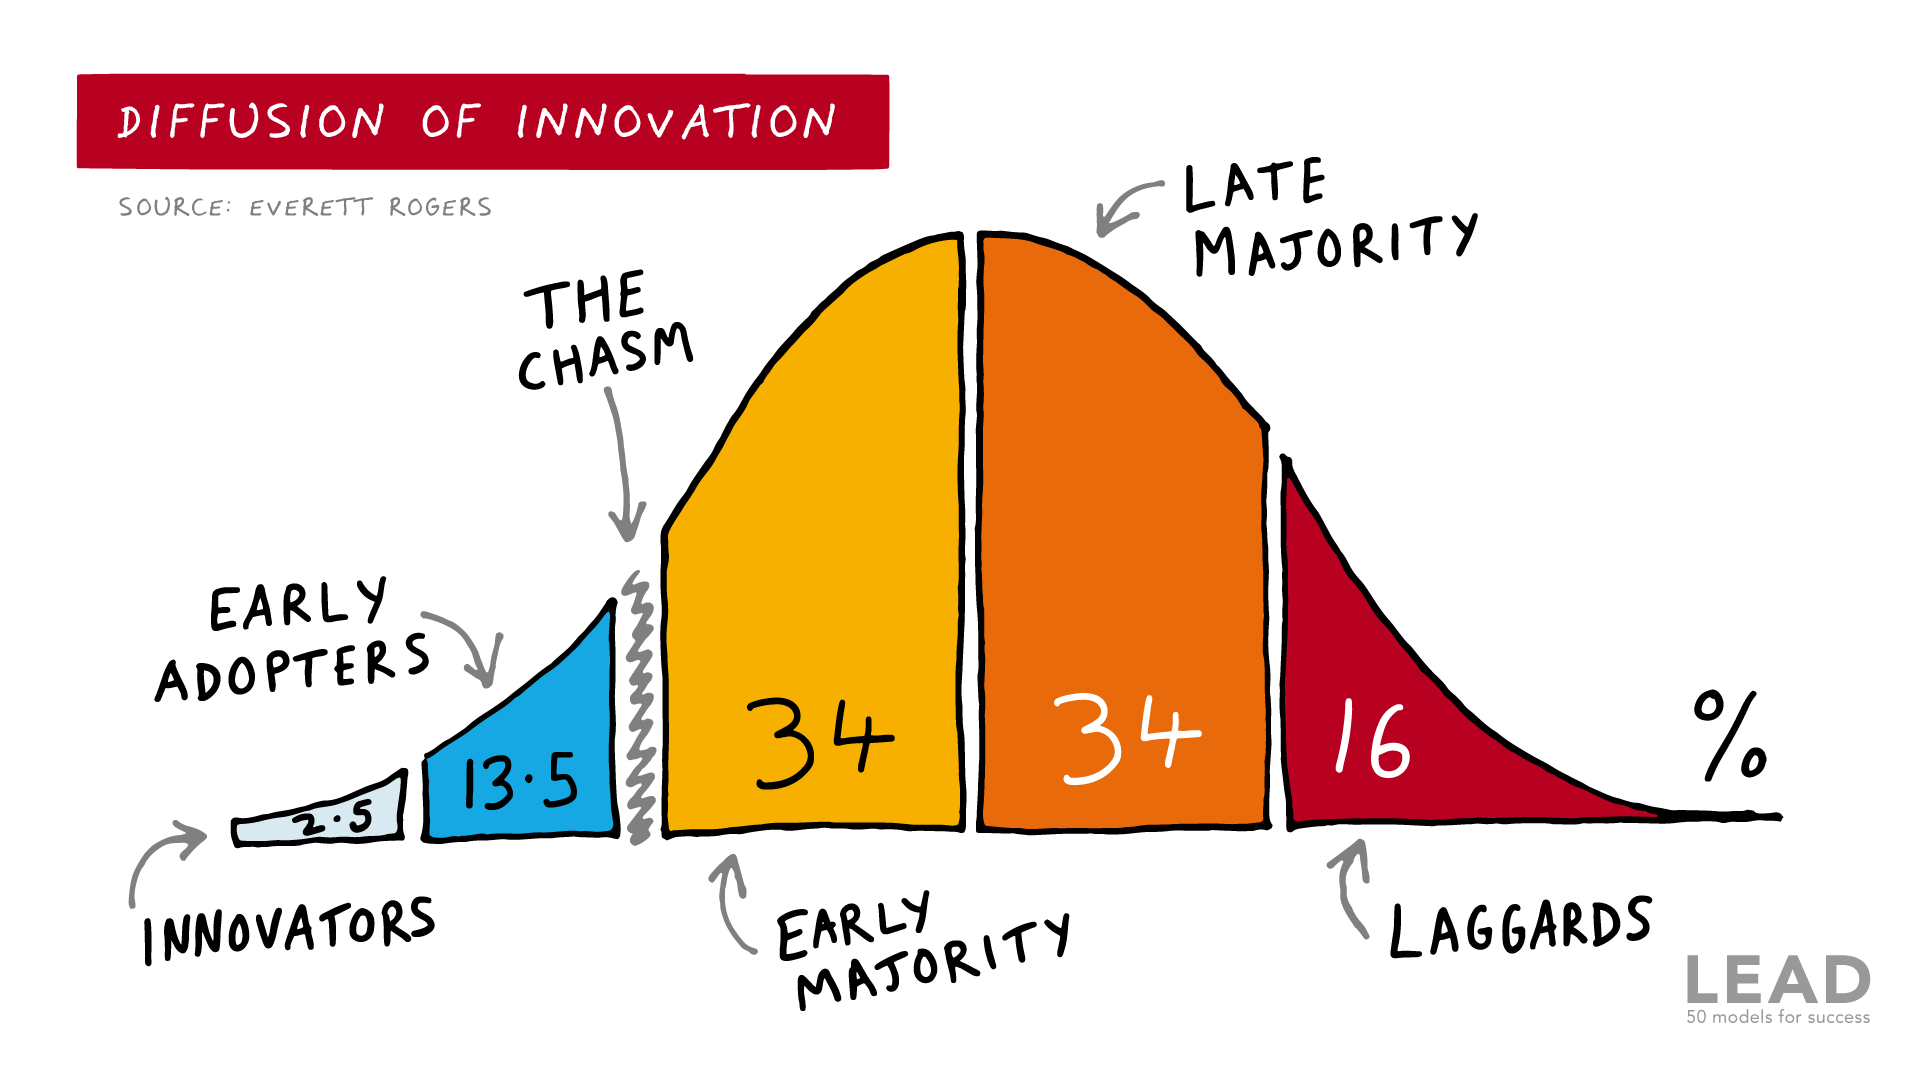 cultural-changing innovation requires early adopters